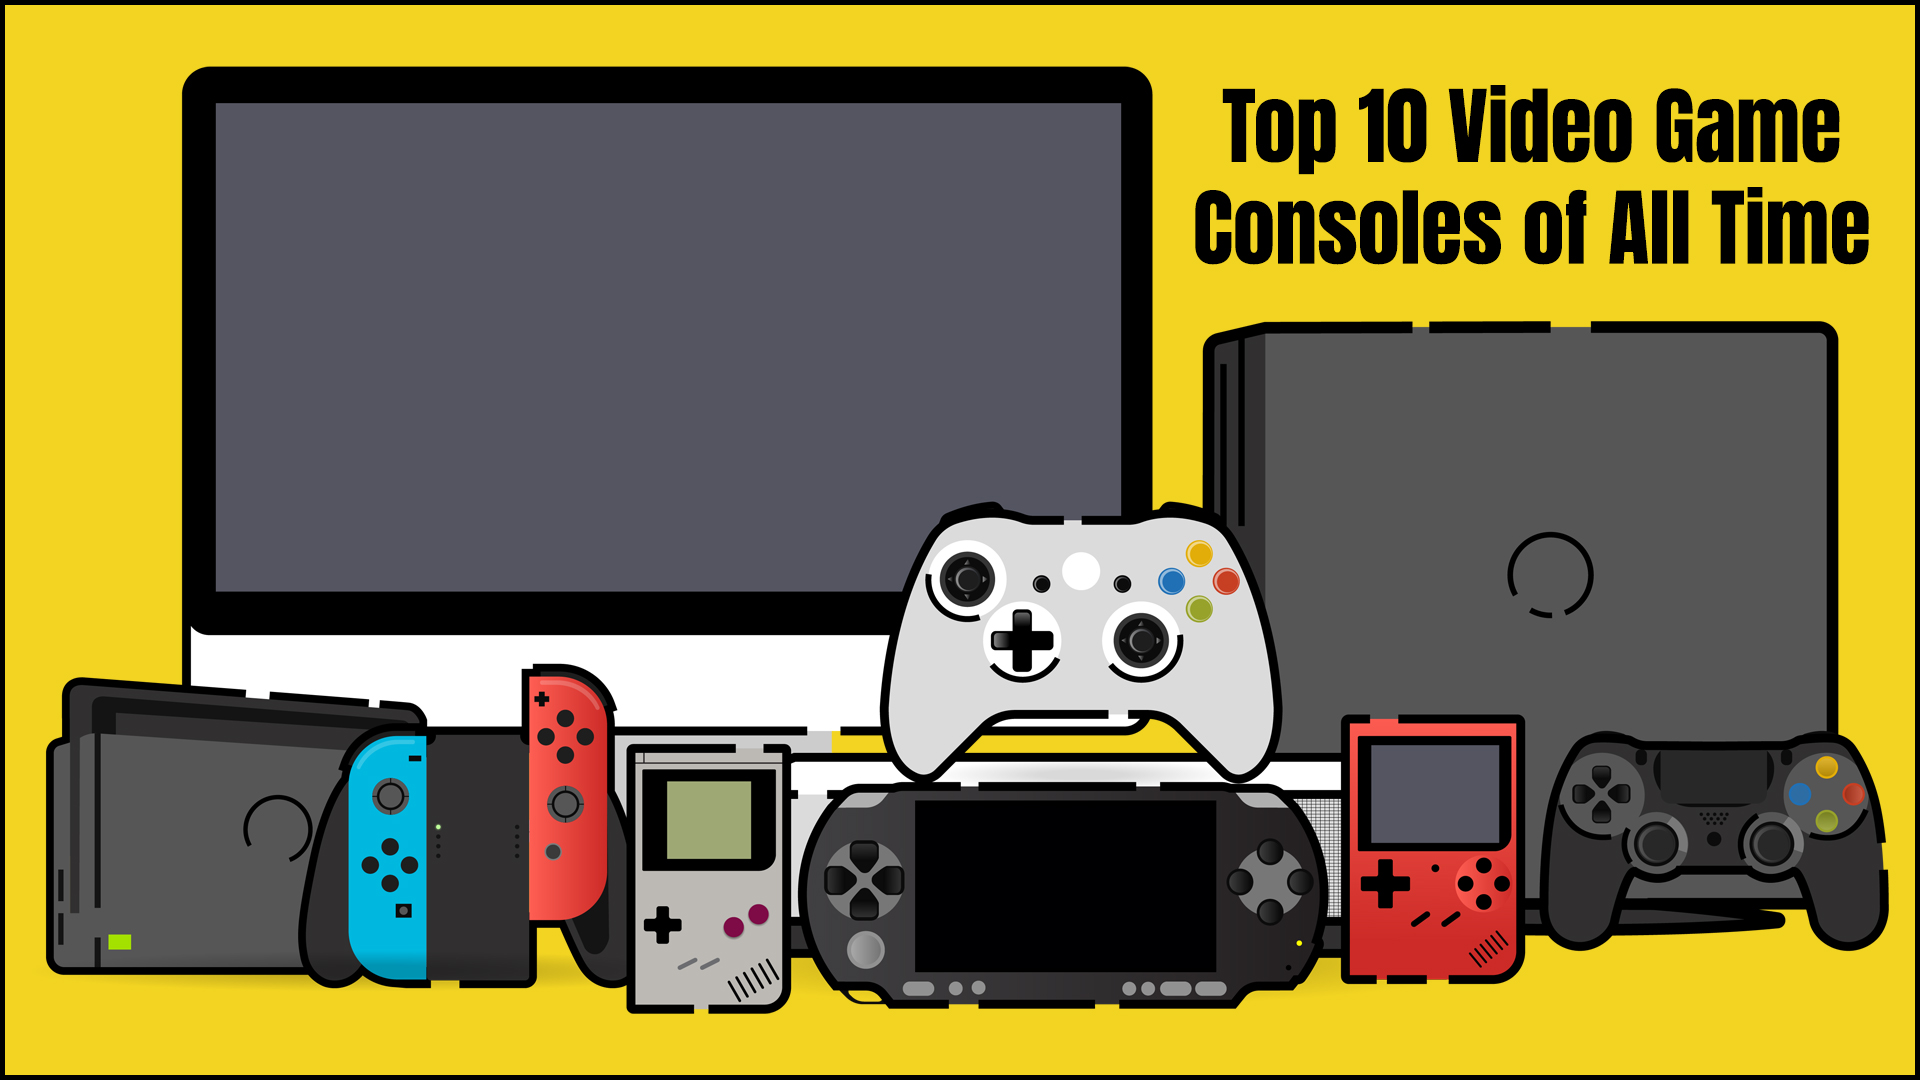 Top 10 Video Game Consoles of All Time